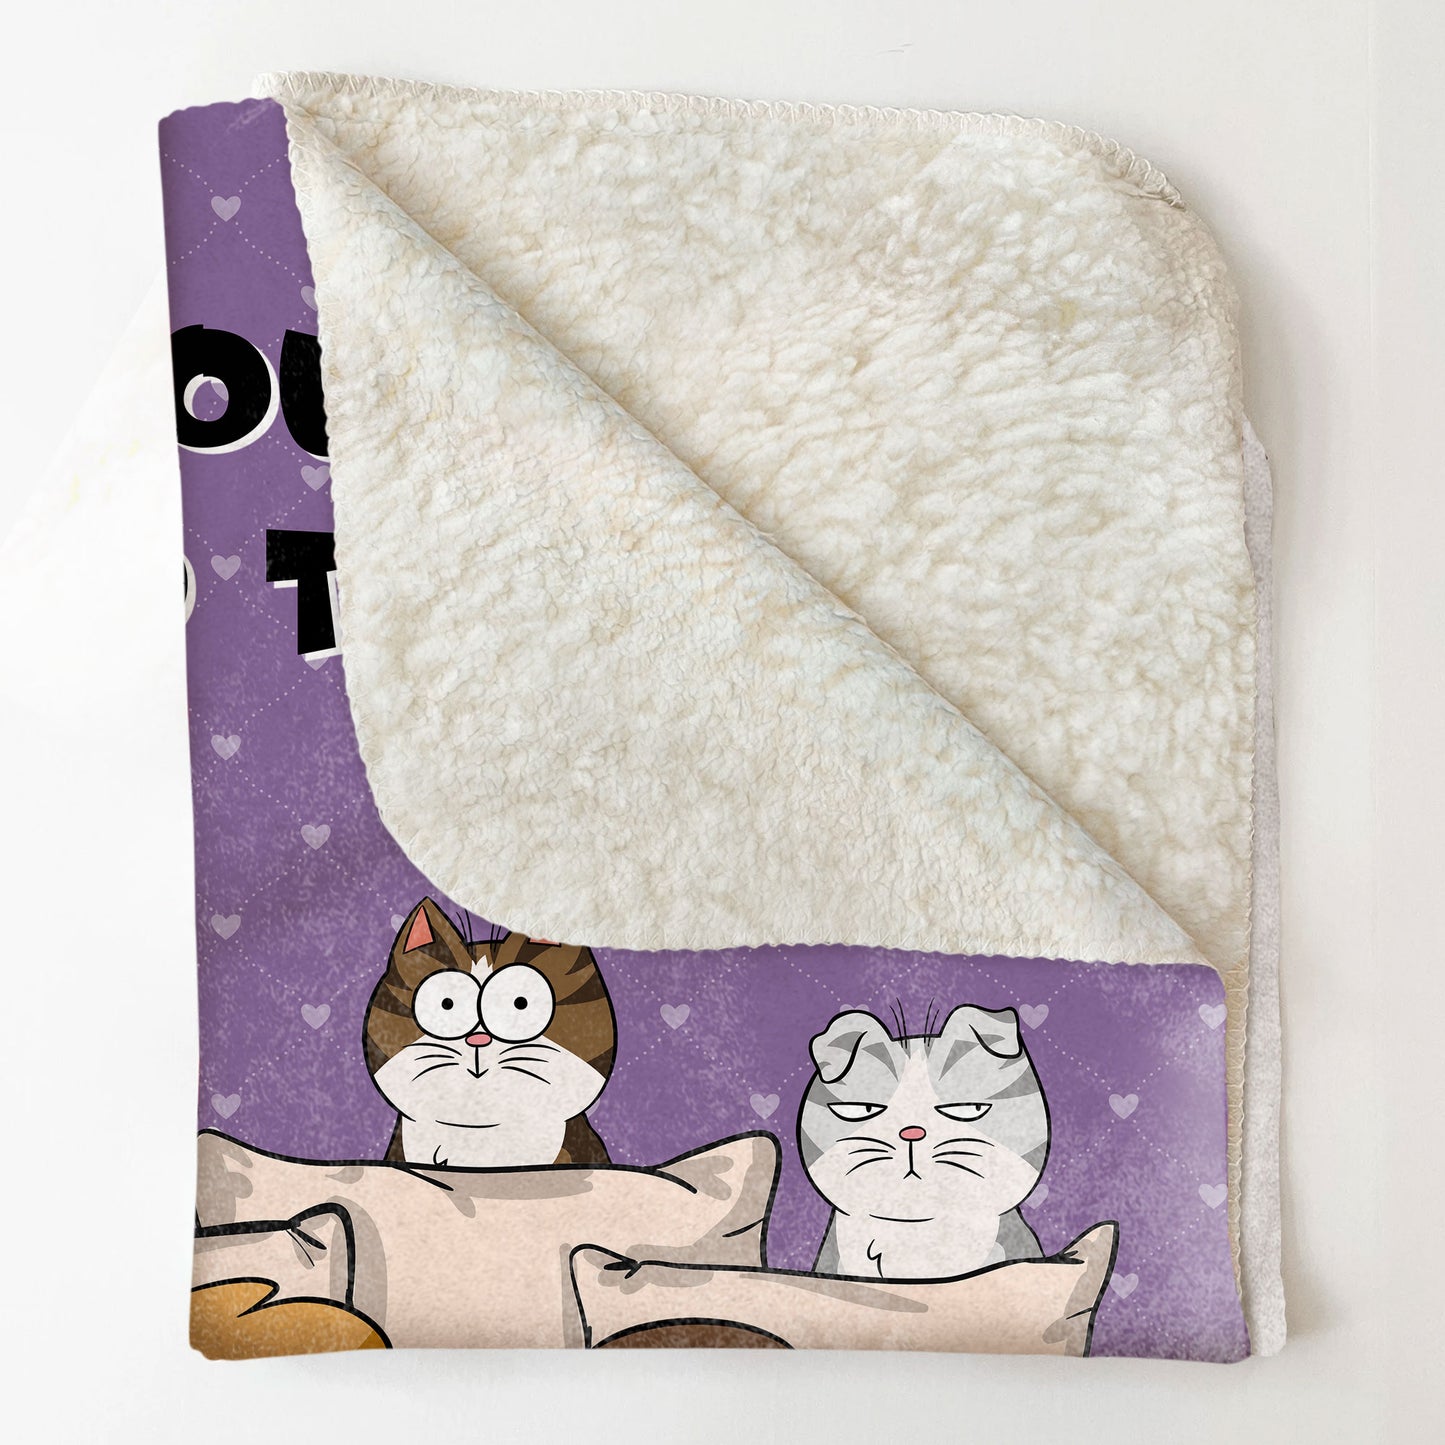 You & Me And The Dogs + The Cats - Personalized Blanket